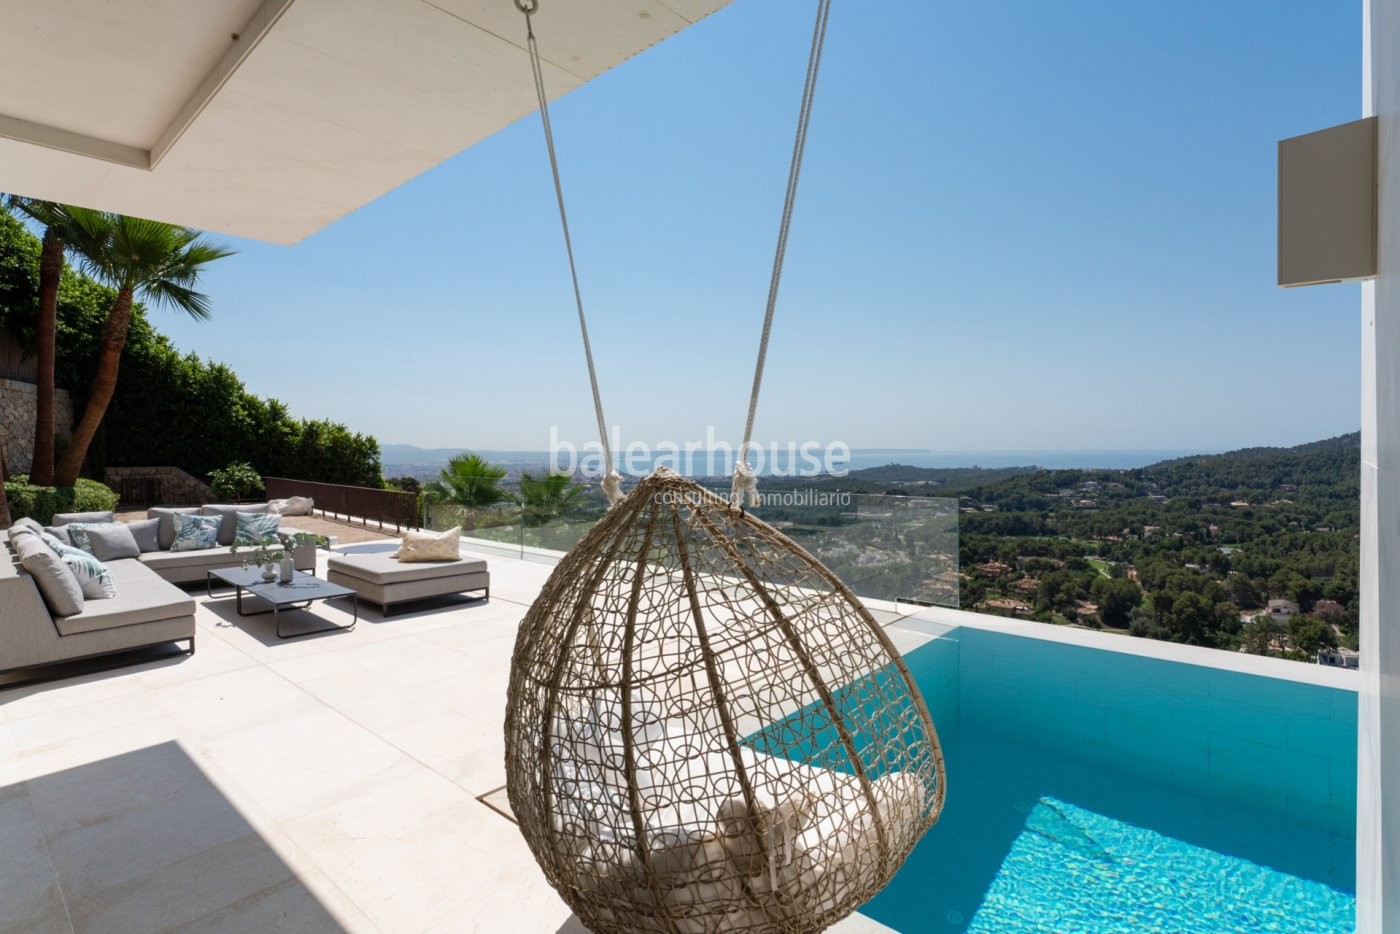 Spectacular designer villa in Son Vida that opens up to the best views of the sea and the city.